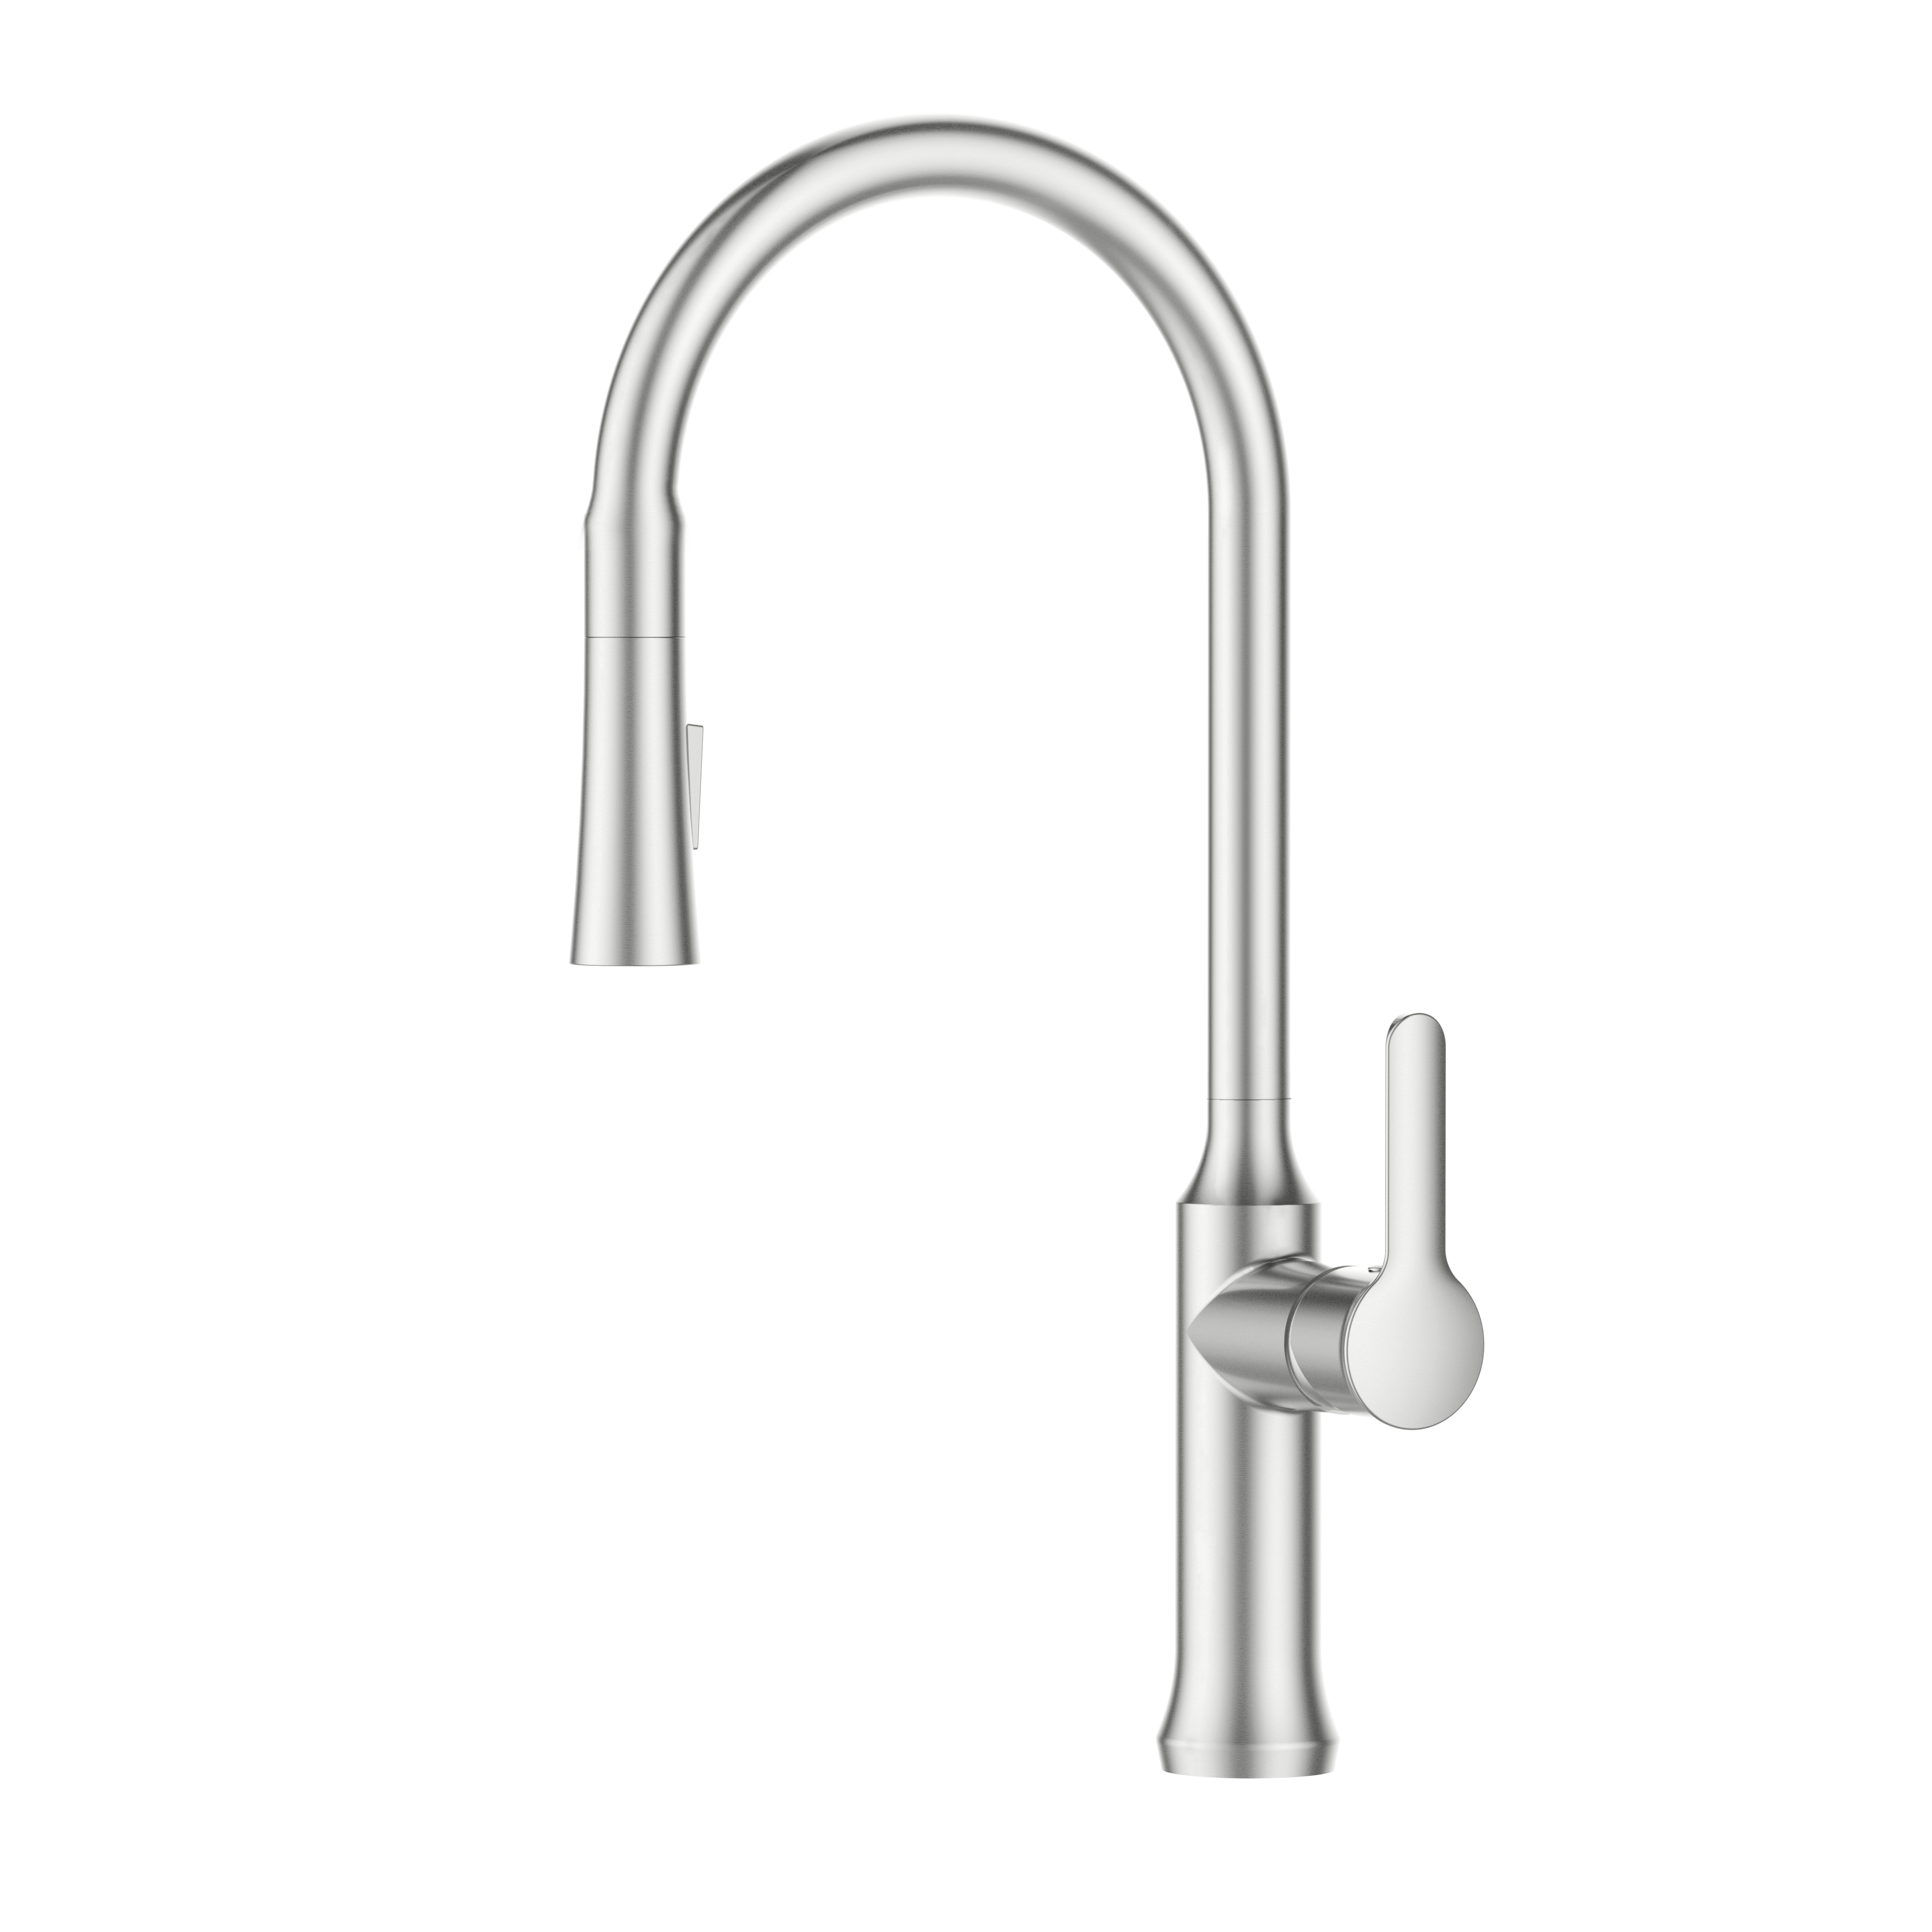 Normal Design Brushed Nickel Kitchen Faucet Fashion Style